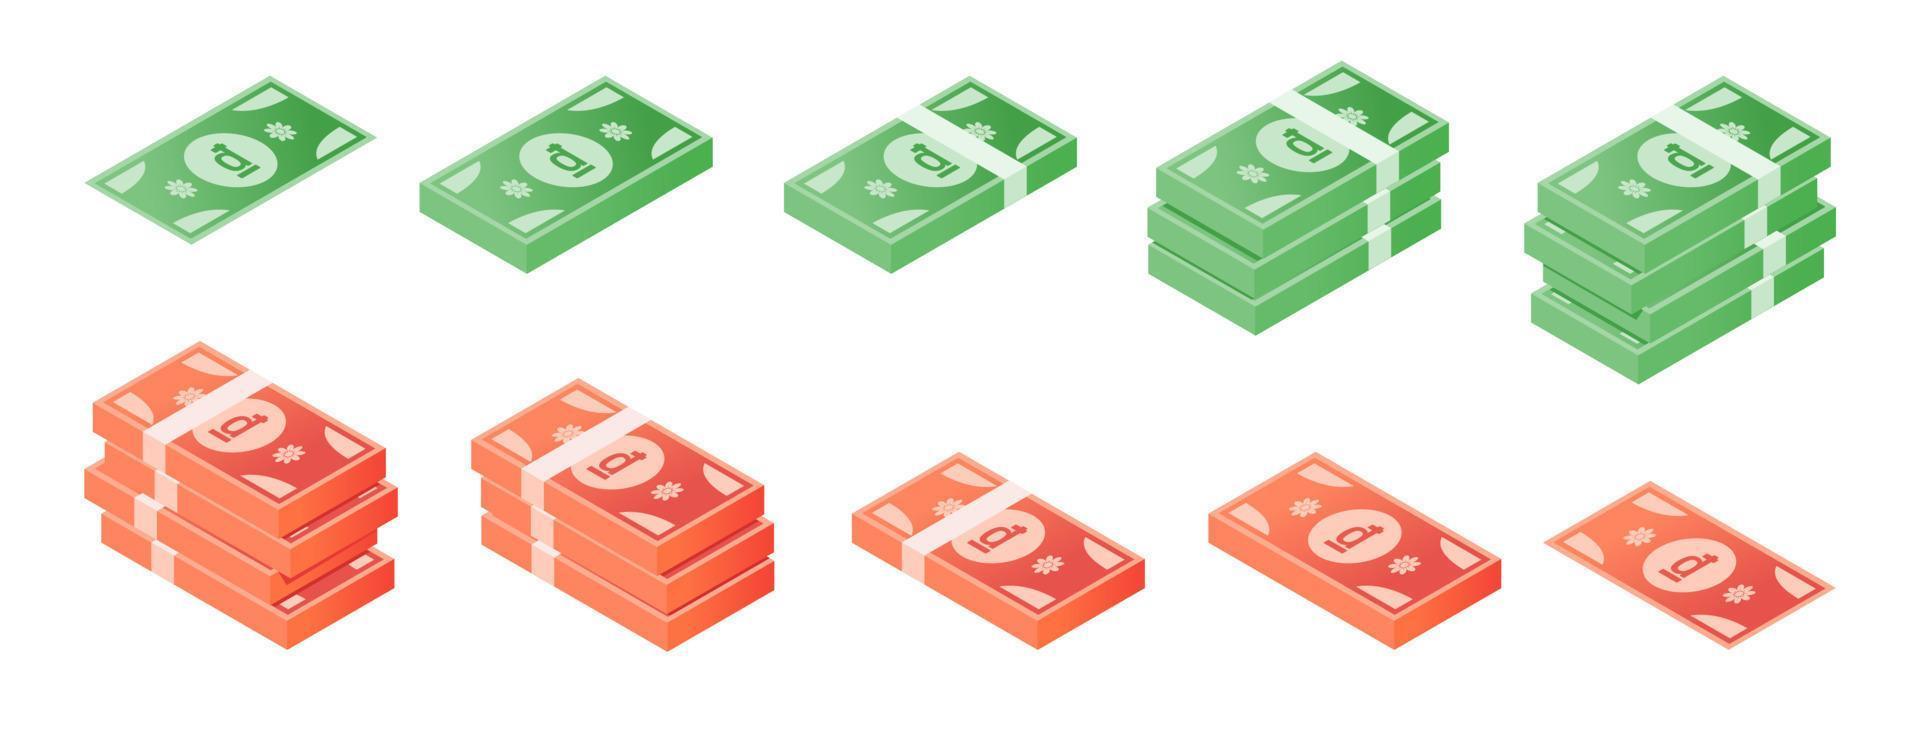 Vietnamese Dong Banknote Isometric Icon Set vector